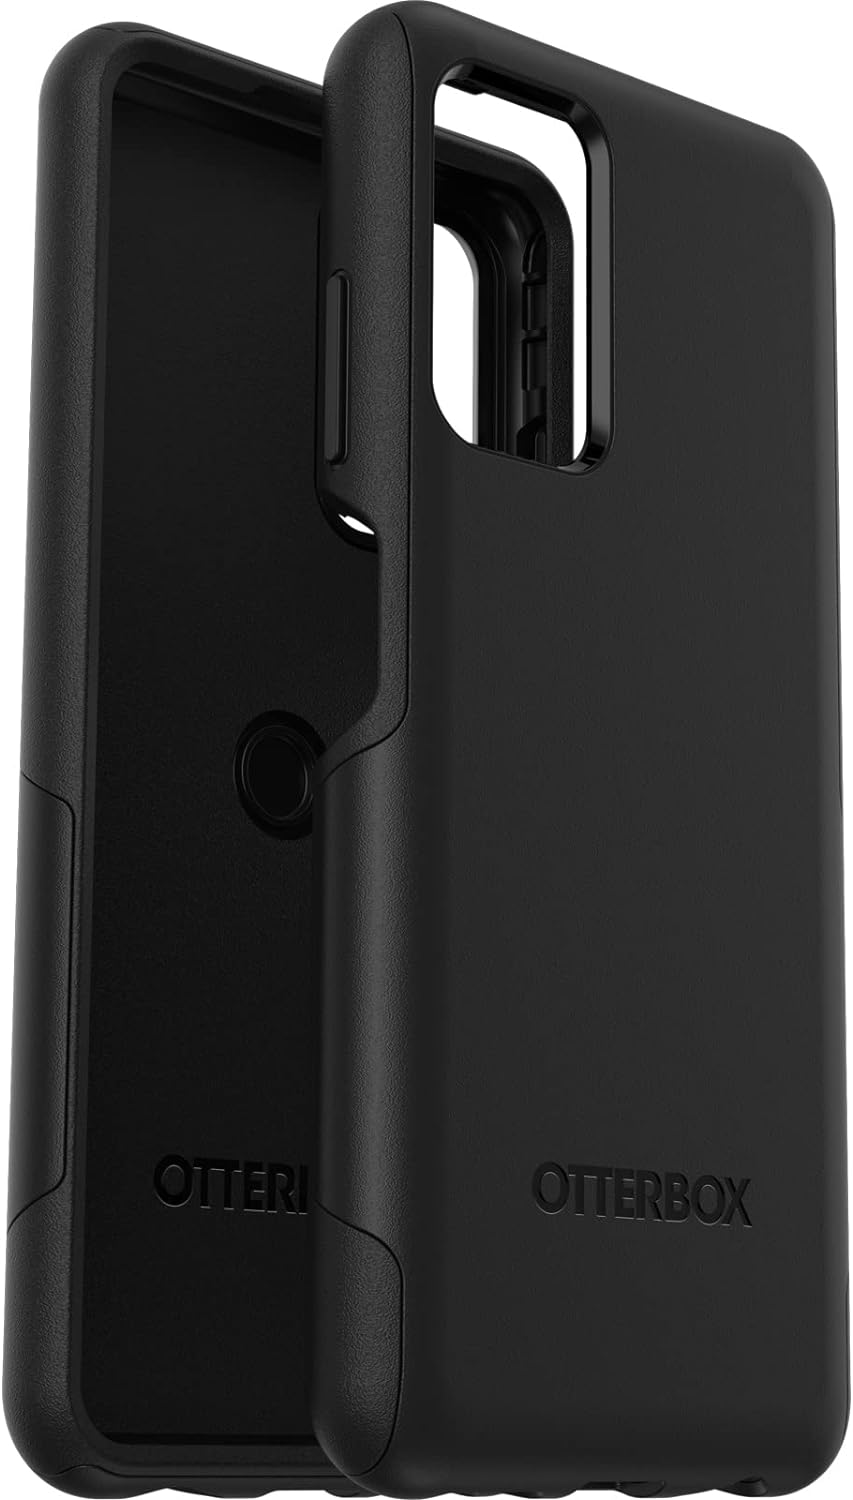 OtterBox COMMUTER SERIES LITE Case for Samsung Galaxy A03s - Black (New)